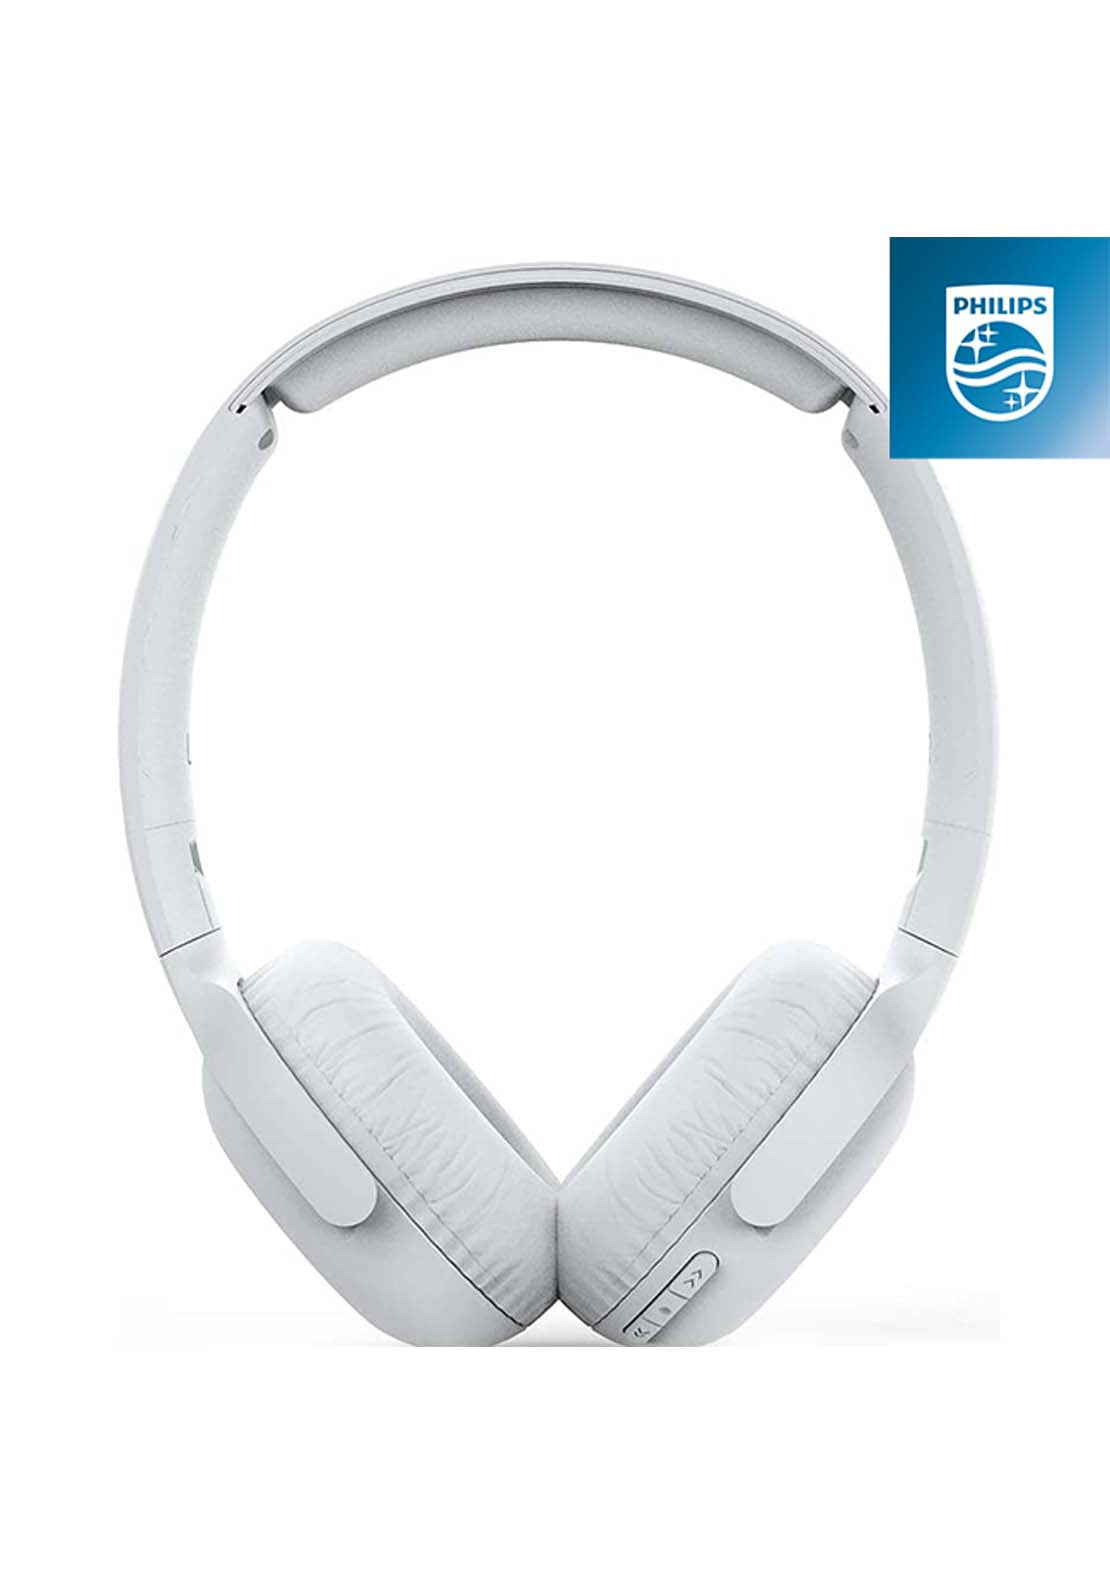 Philips On-Ear Bluetooth Headphones | Tauh202Wt00 1 Shaws Department Stores